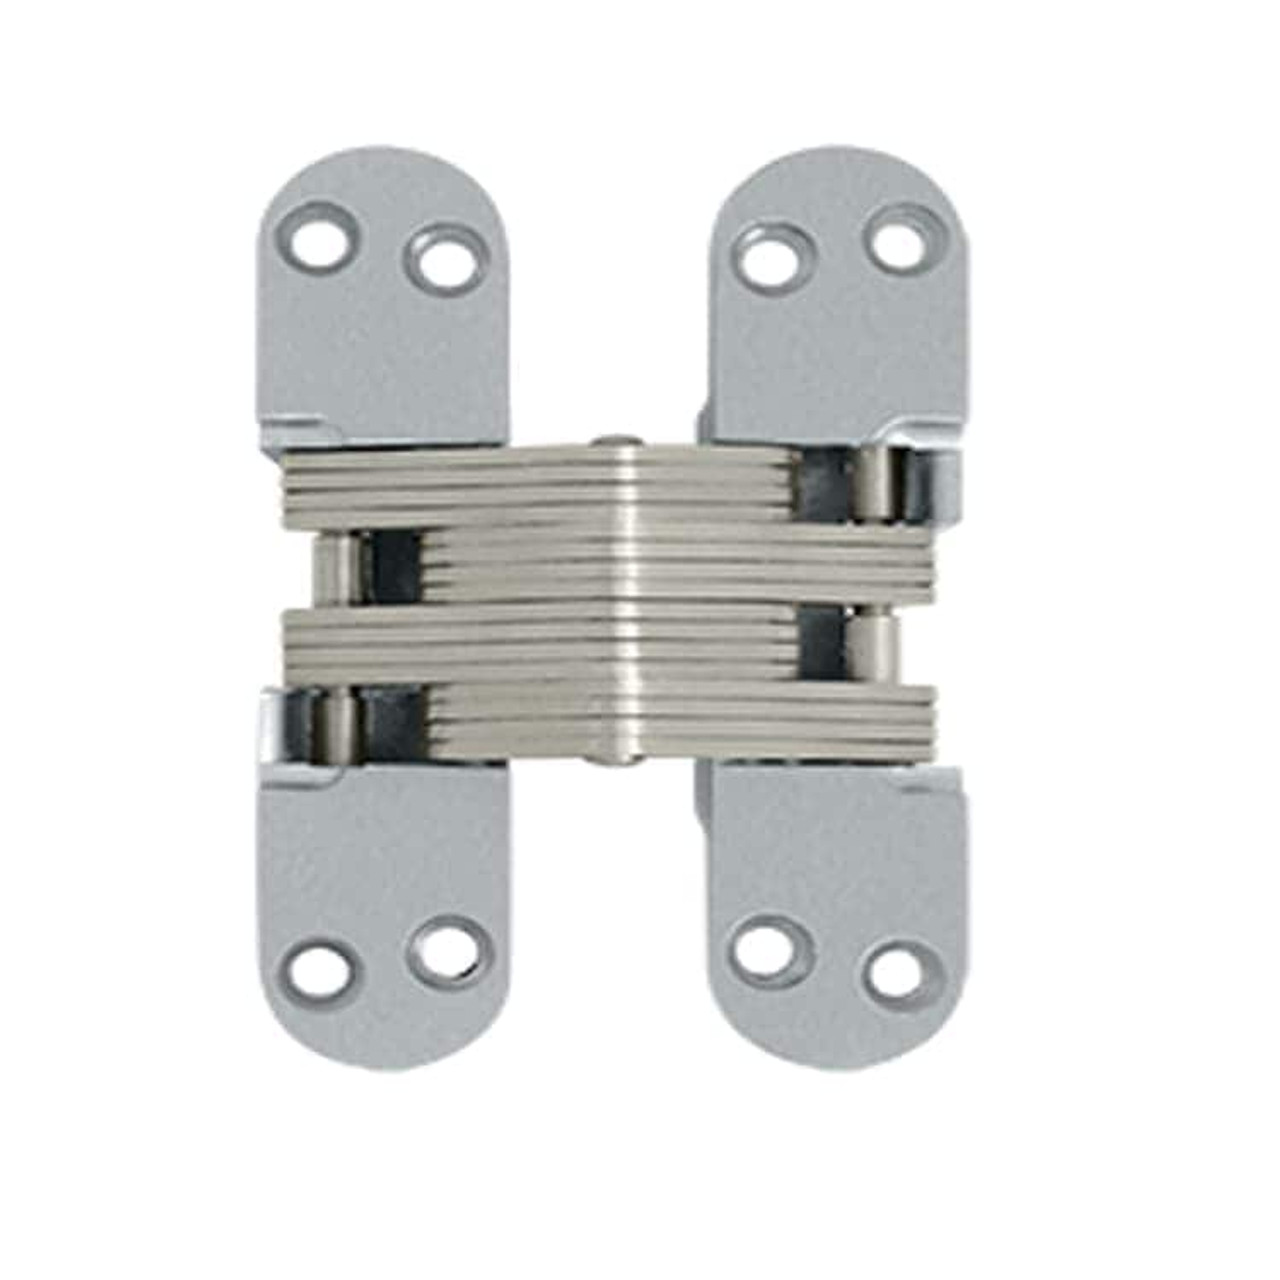 Choosing a Concealed Door Hinge  Finding the Right Hidden or Invisible  Hinge. 